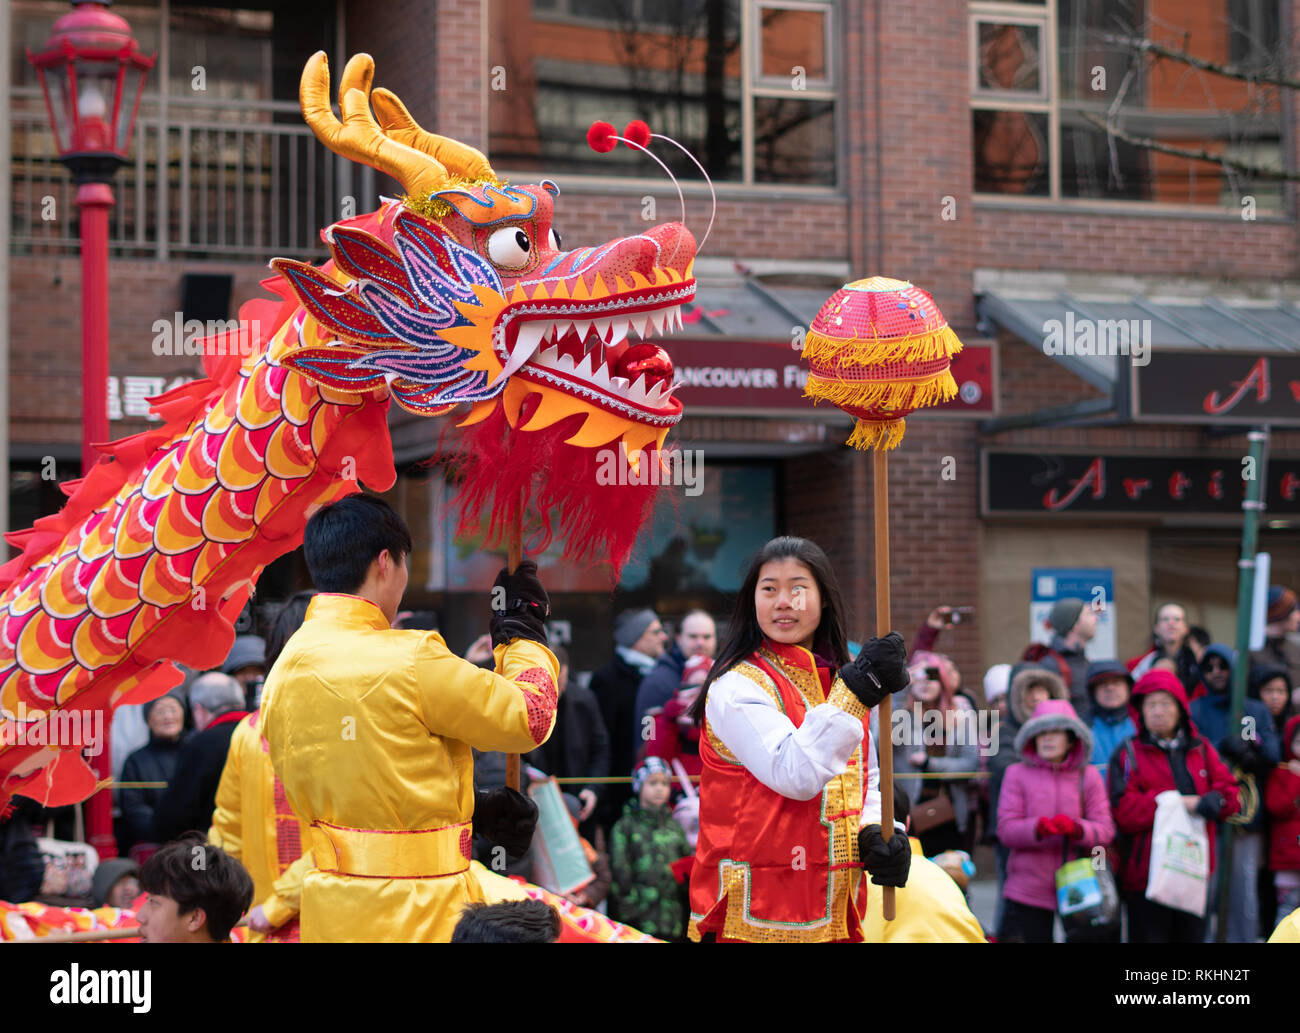 A group performs a Chinese Dragon dance in the 2019 Chinese New Year parade Stock Photo